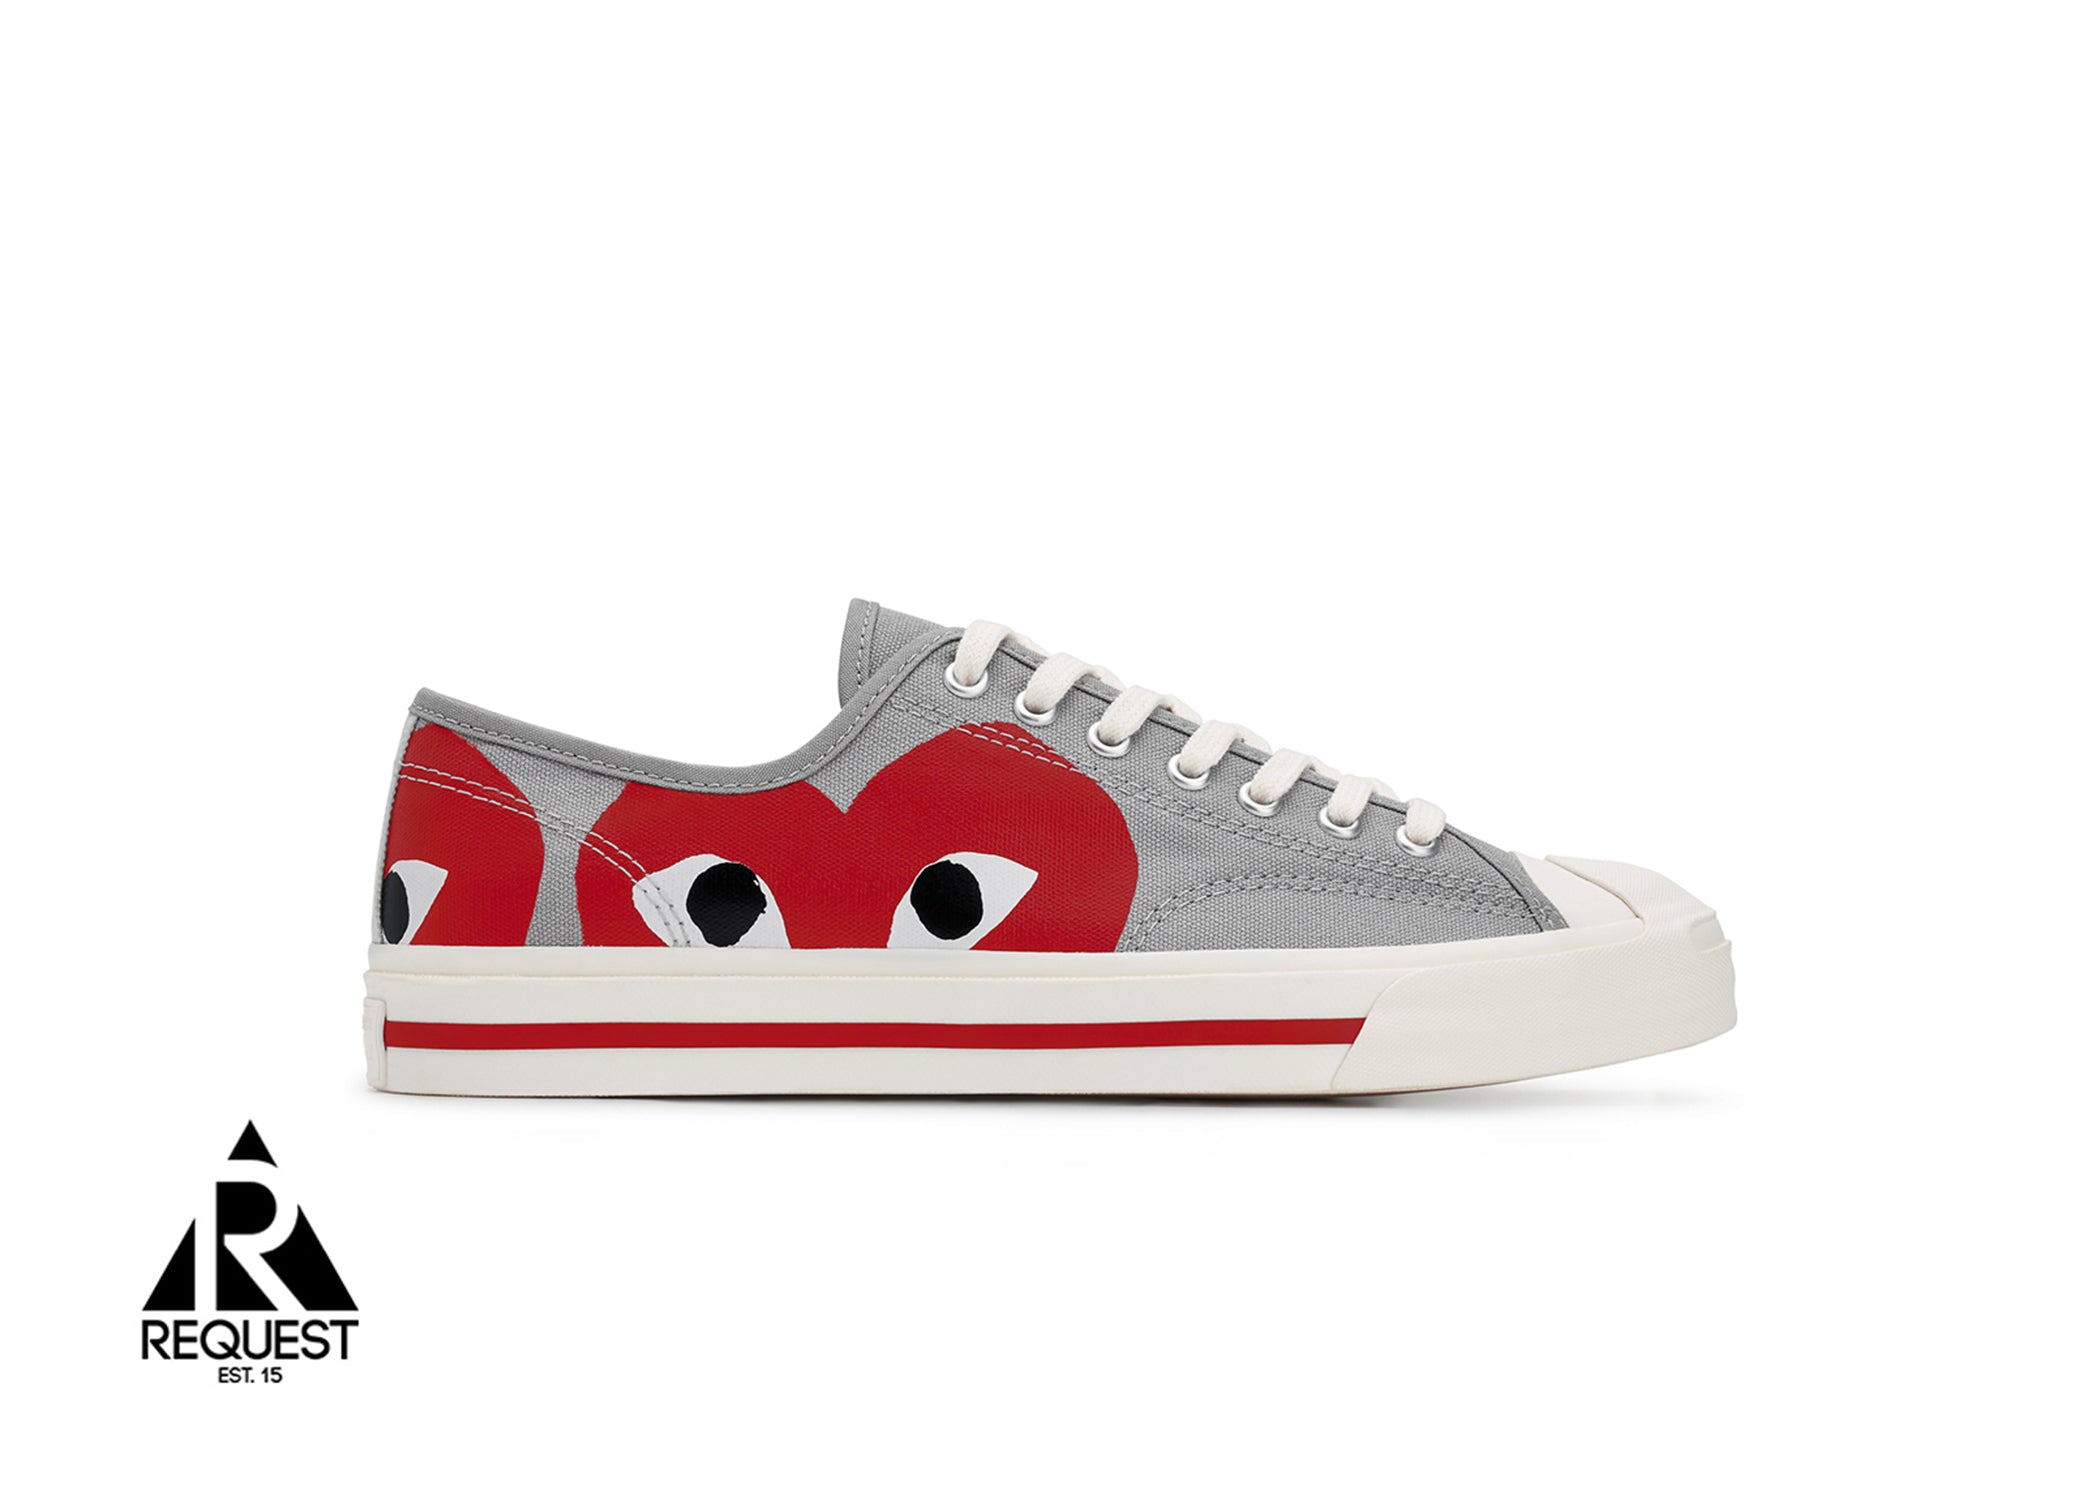 Converse Jack Purcell CDG Red” | Request